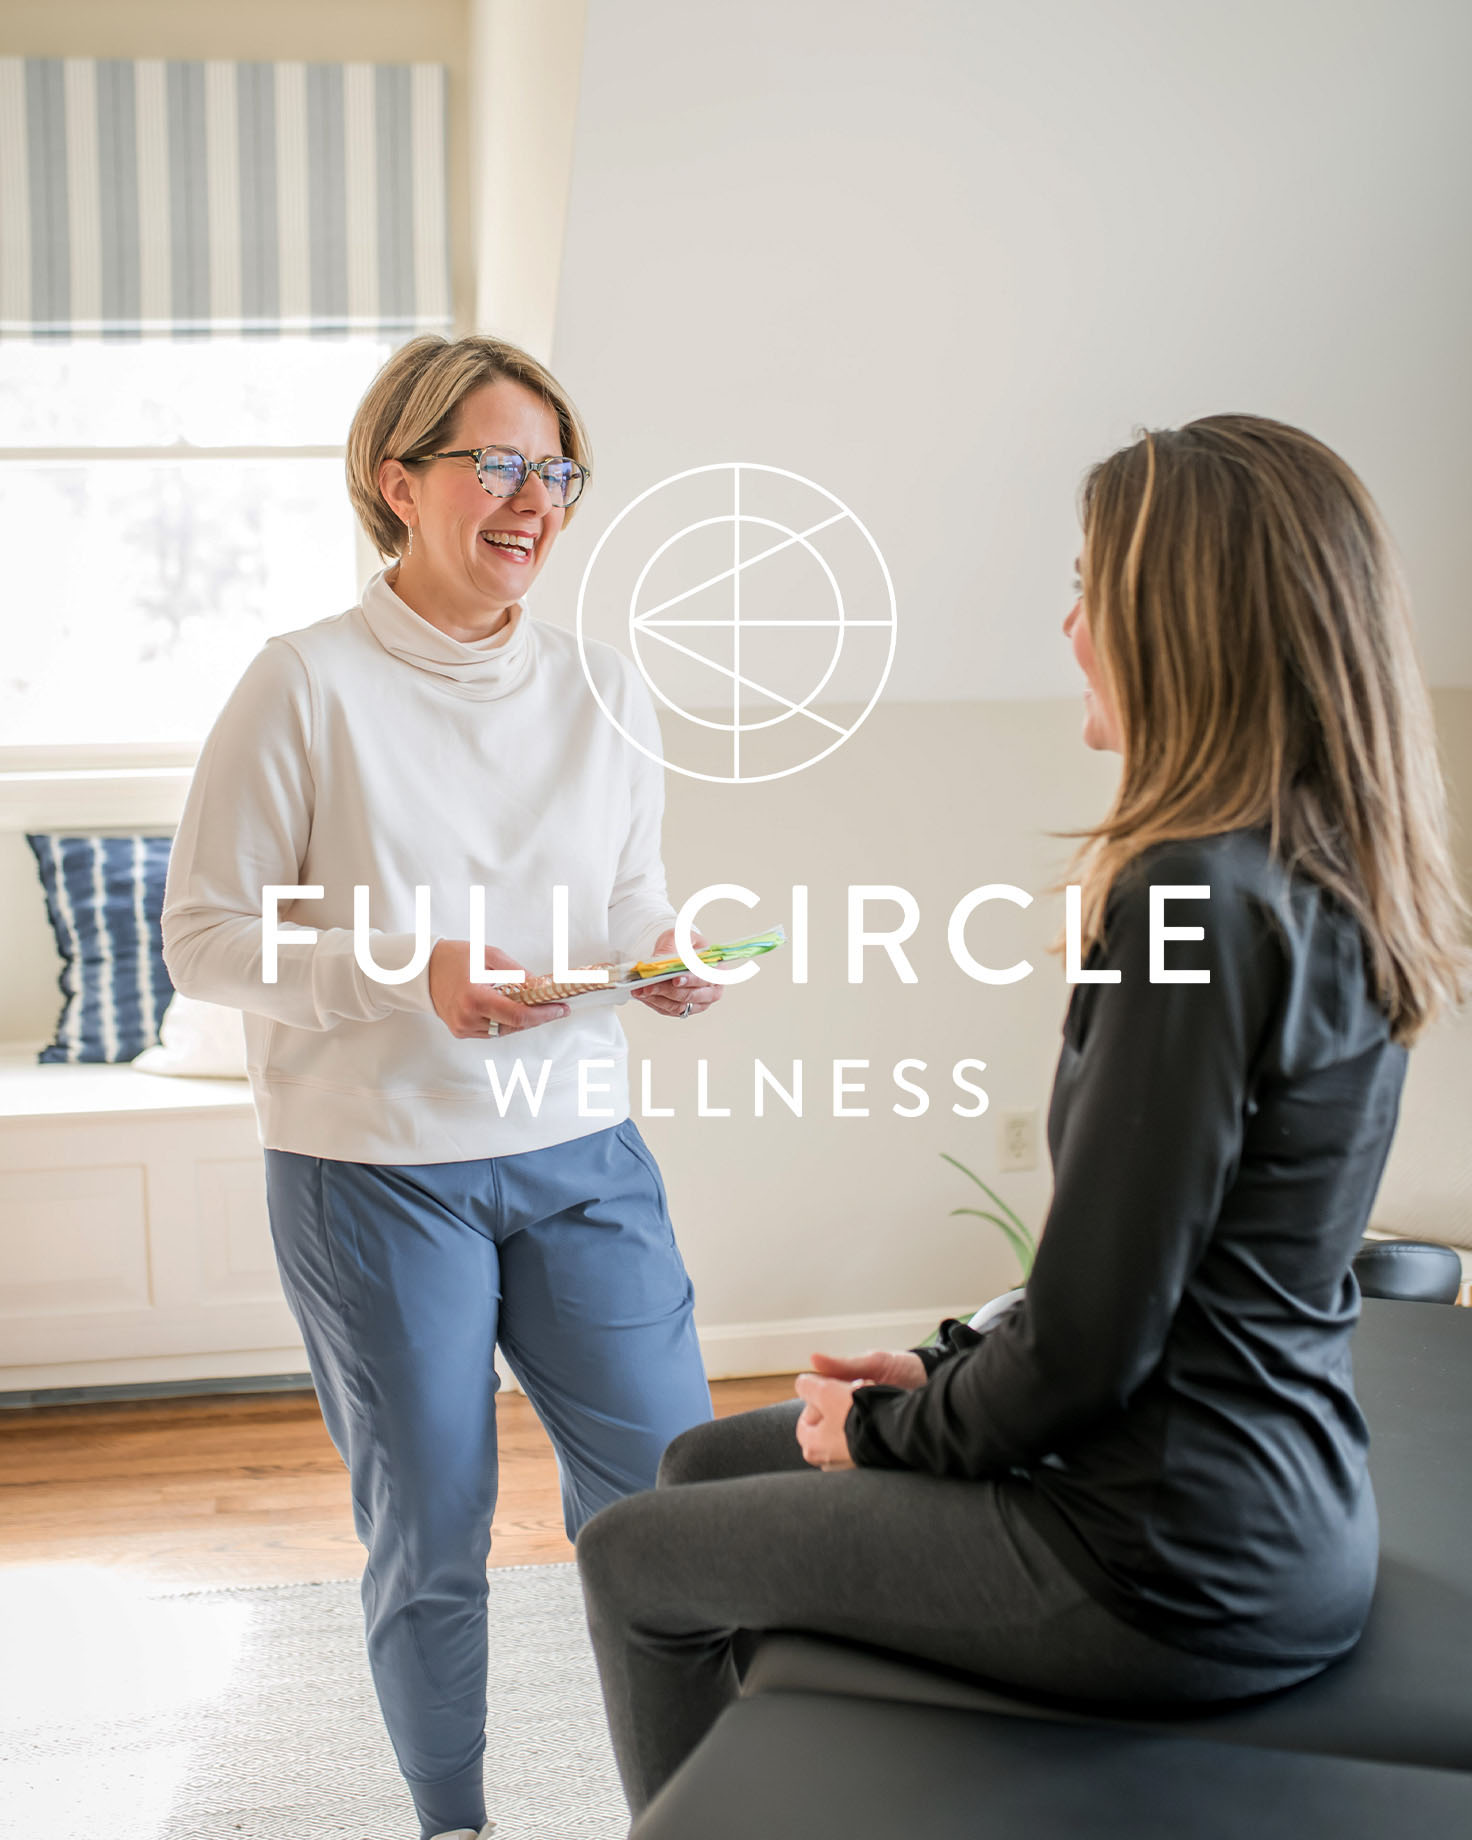 Logo Design mockup for Full Circle Wellness - Whiskey and Red Small Business Branding and Website Design Packages